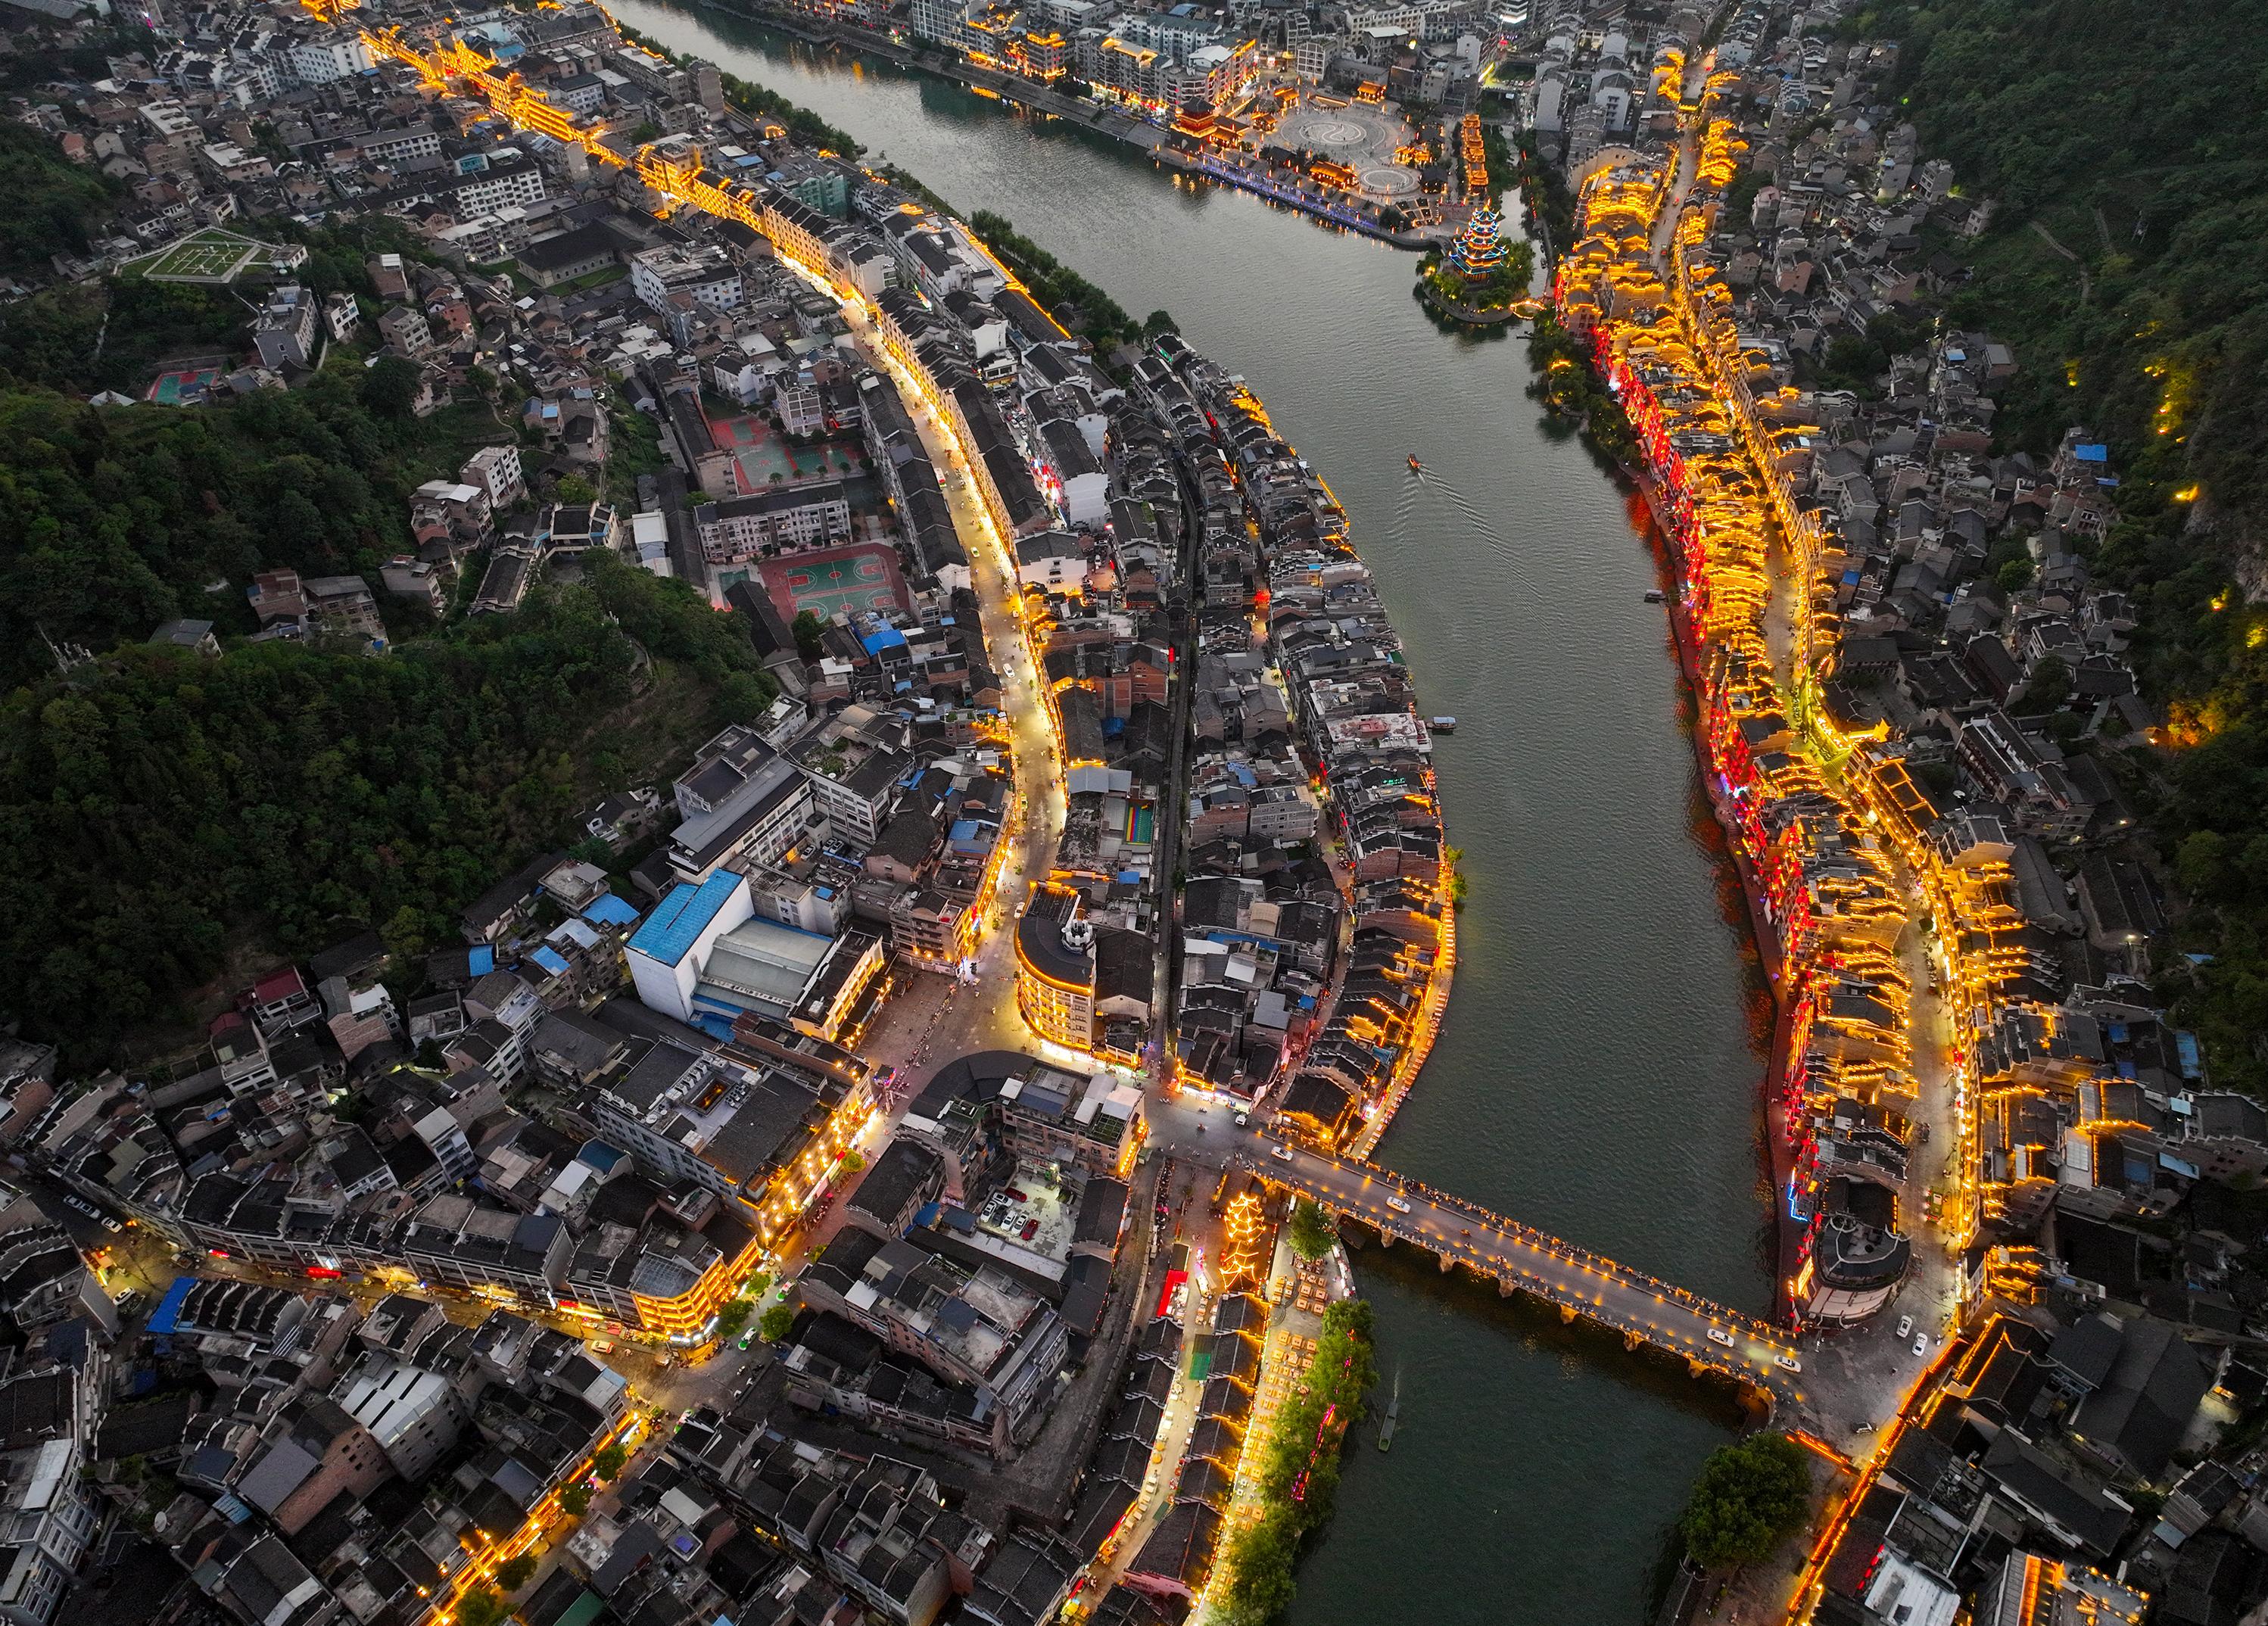 A night view of Zhenyuan ancient town in southwest China's Guizhou Province. /CNSPHOTO